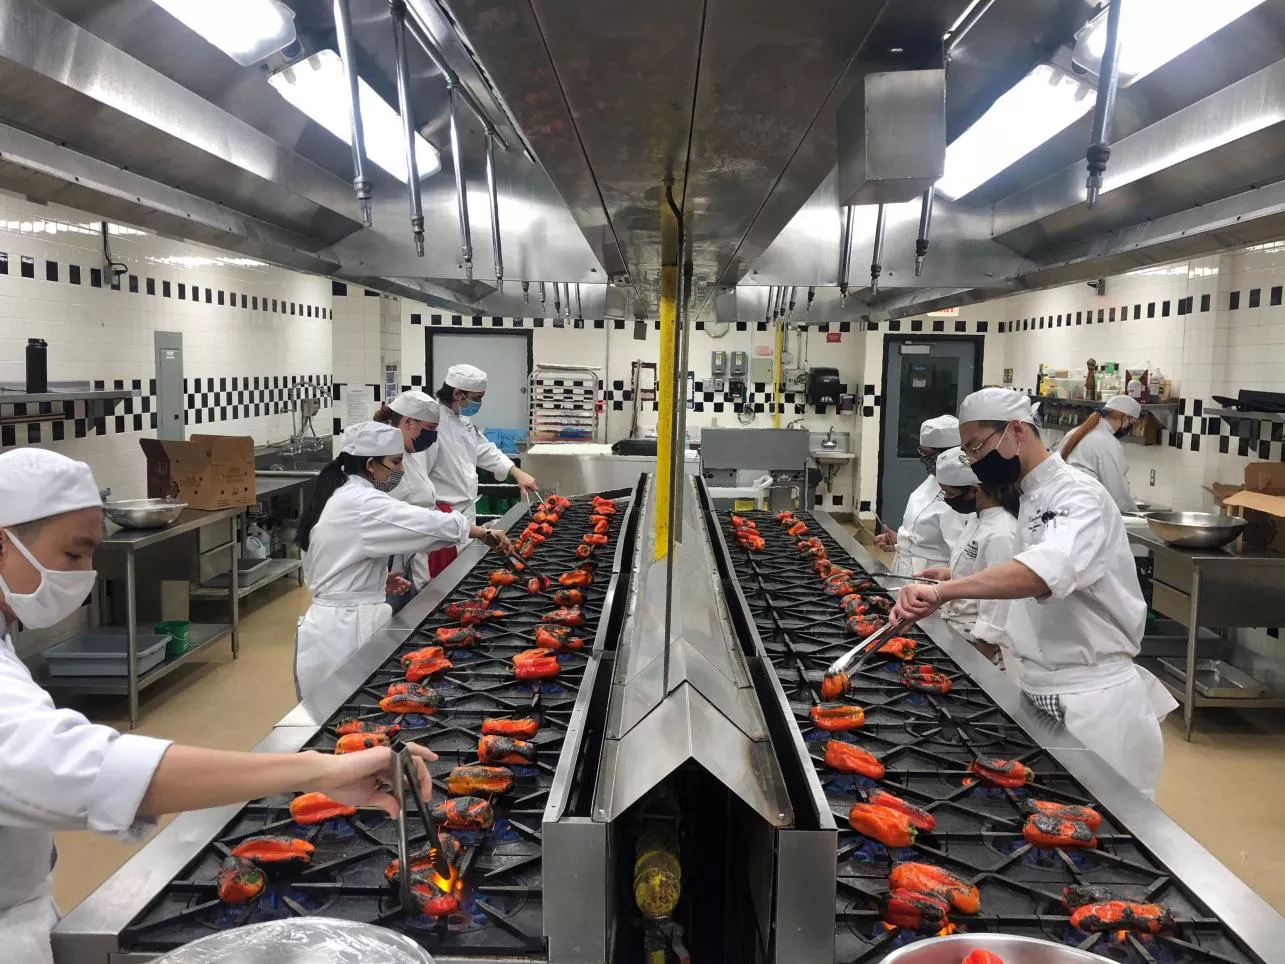 Second-Year Culinary Management students preparing roasted red peppers